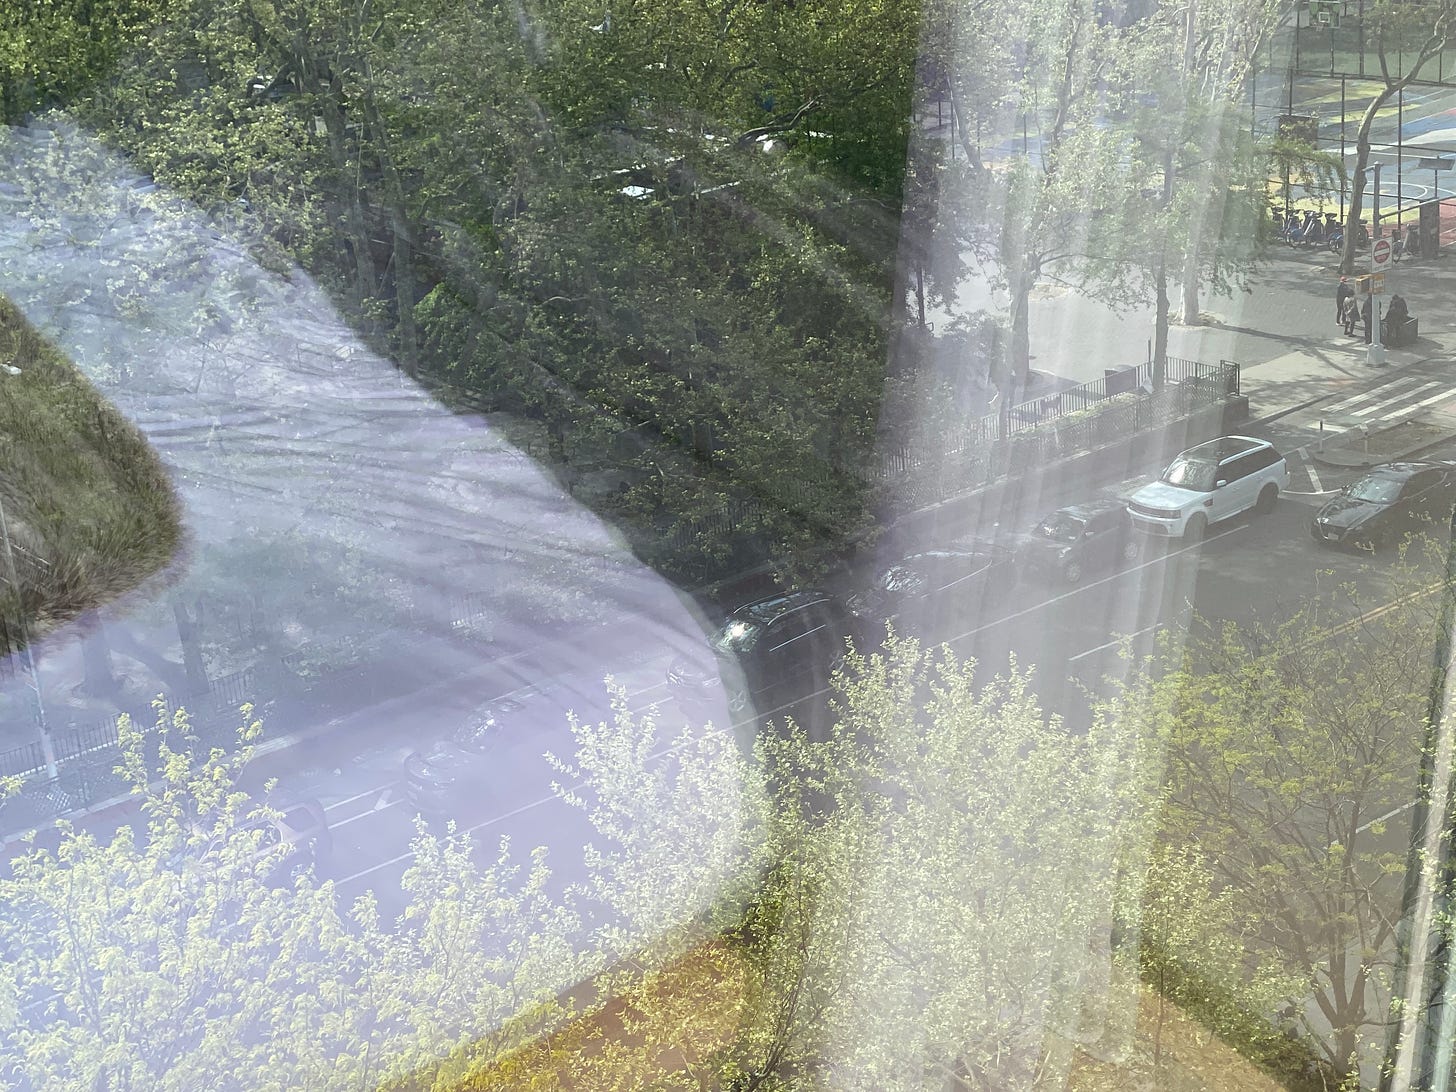 A photograph taken out a window looking down on a sunny street with cars and just-leafing trees. You can see reflections from inside the room, like haze ghost-images: a curtain coming down like shafts of light, the corner of a bed with white sheets. The overall effect of the image is being able to see and not being able to see at the same time.